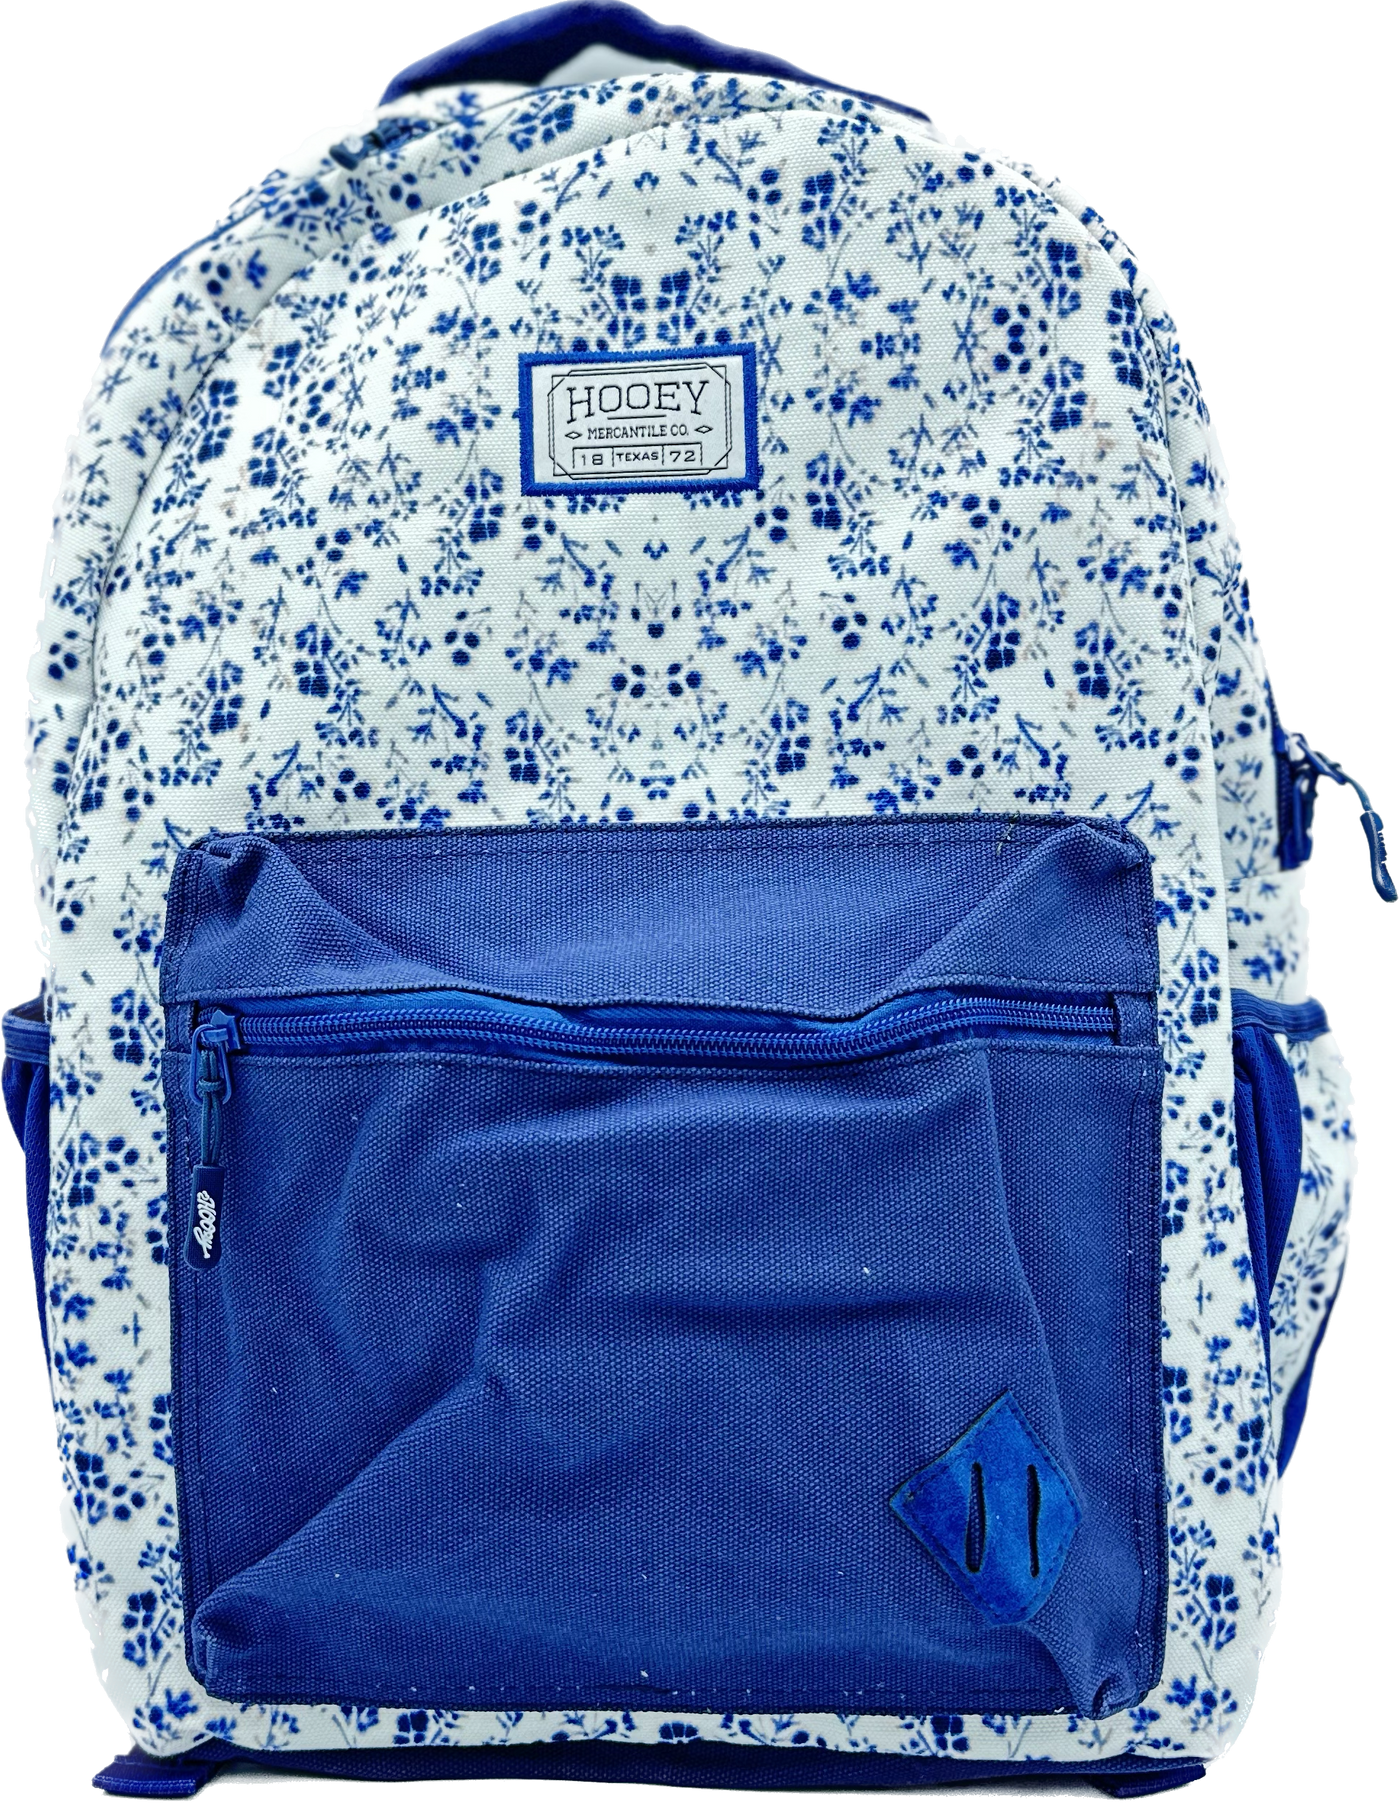 "Recess" White/Navy Floral Pattern Backpack